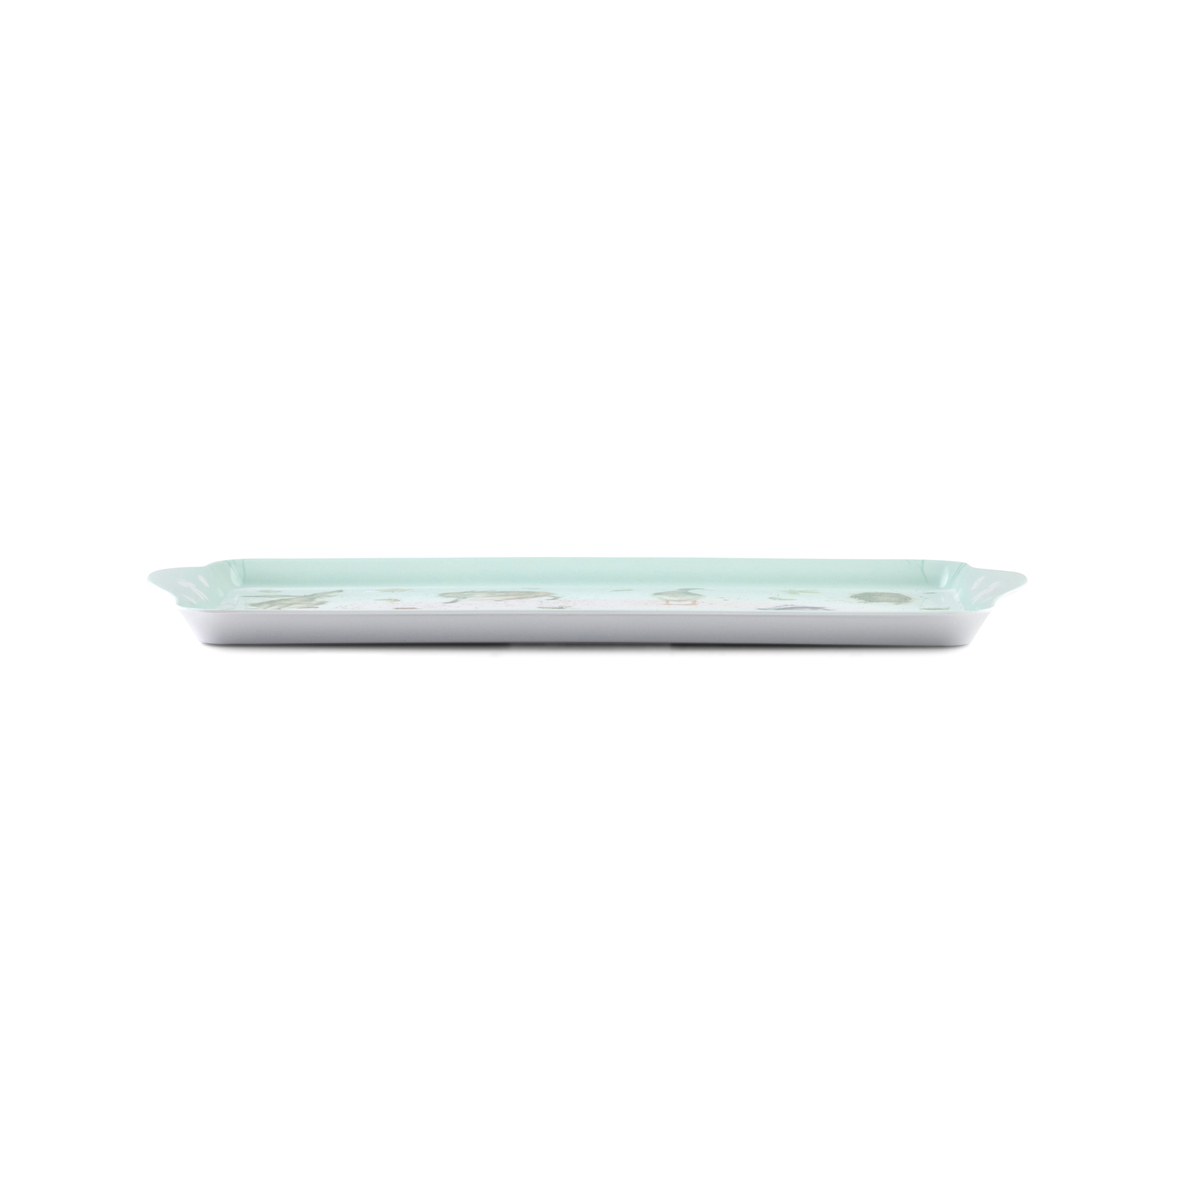 Wrendale Designs Melamine Sandwich Tray (Assorted) image number null